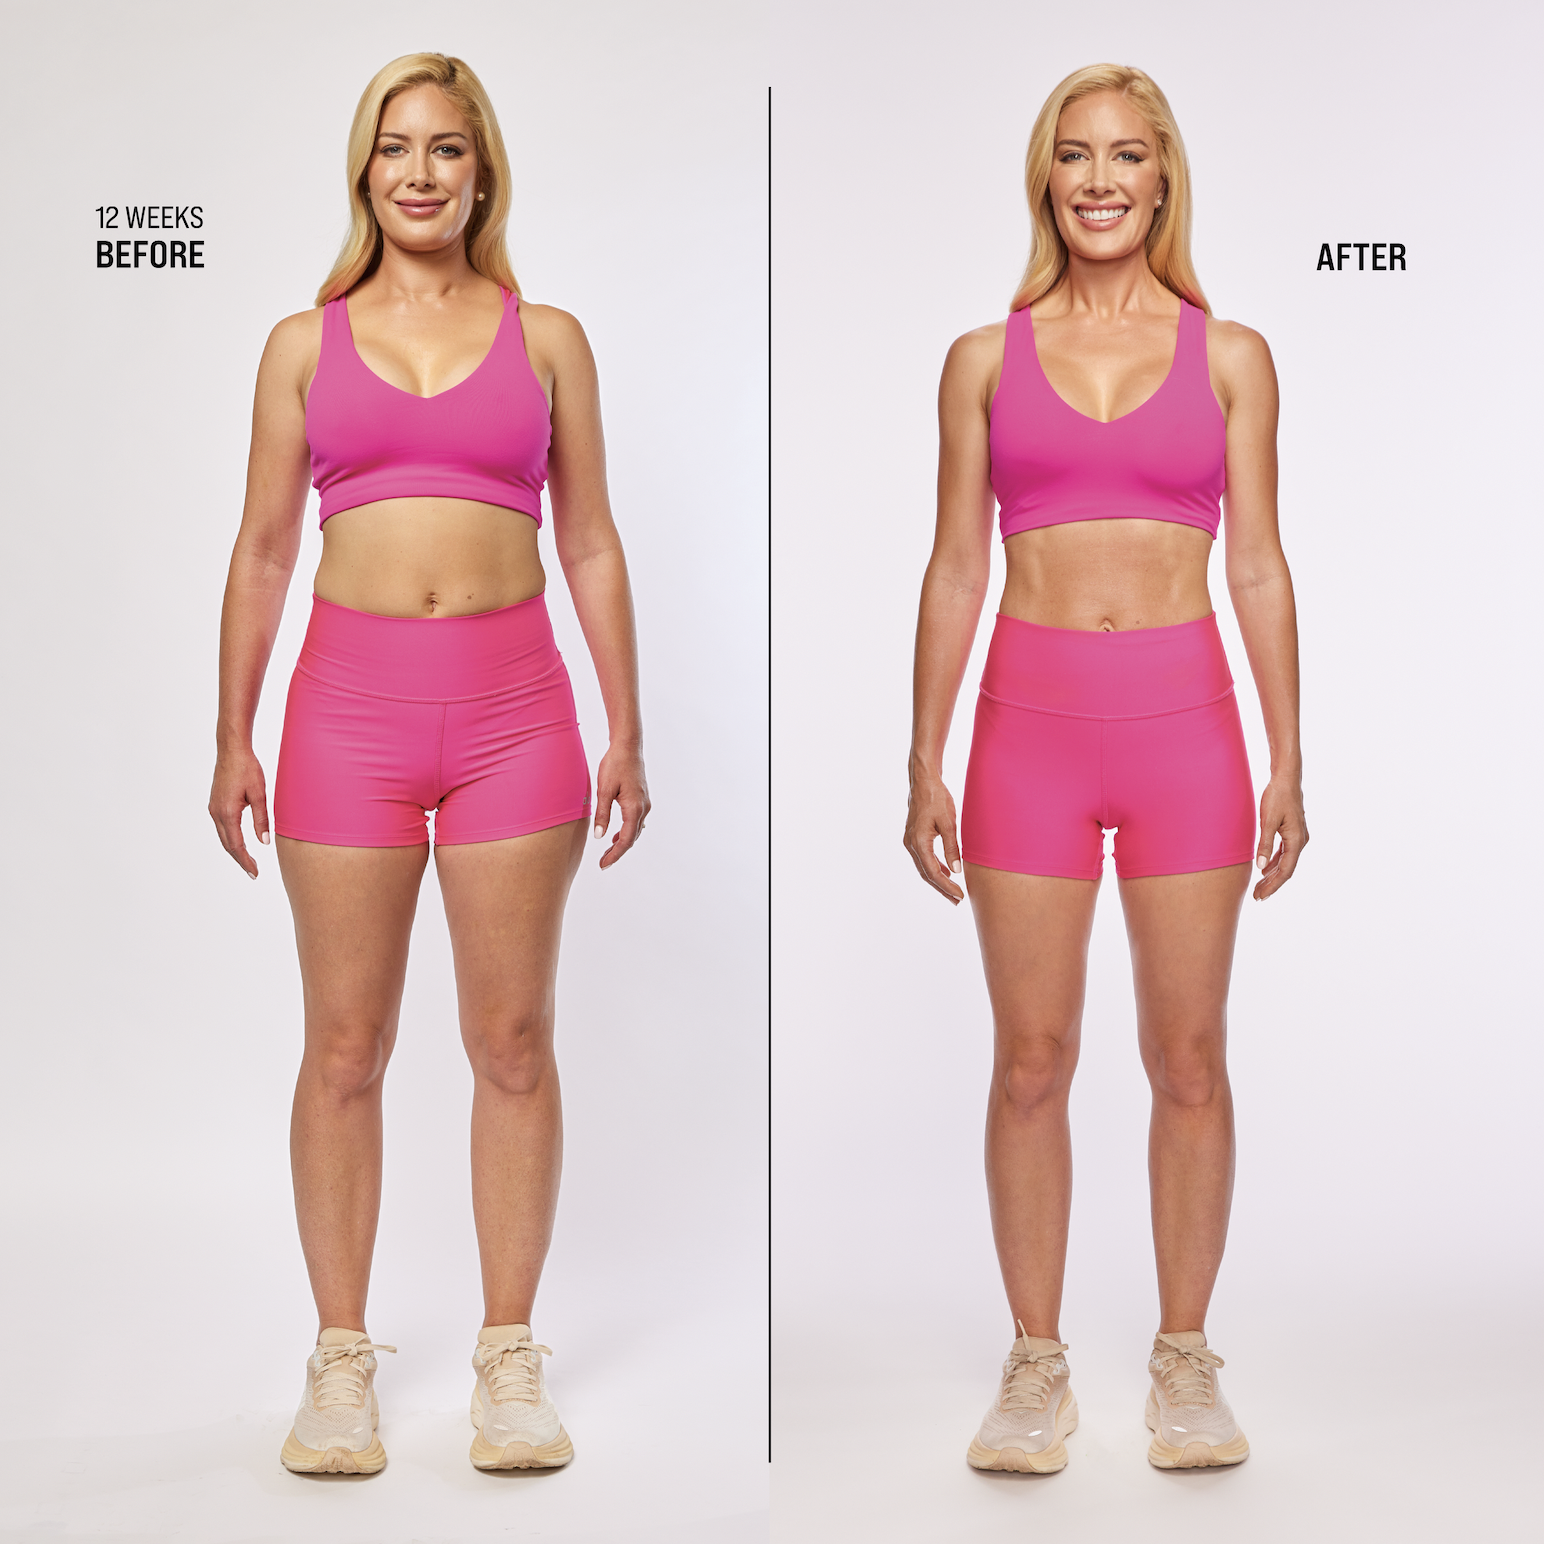 Heidi Montag To Be Featured In Hydroxycut® 2024 Ad Campaign